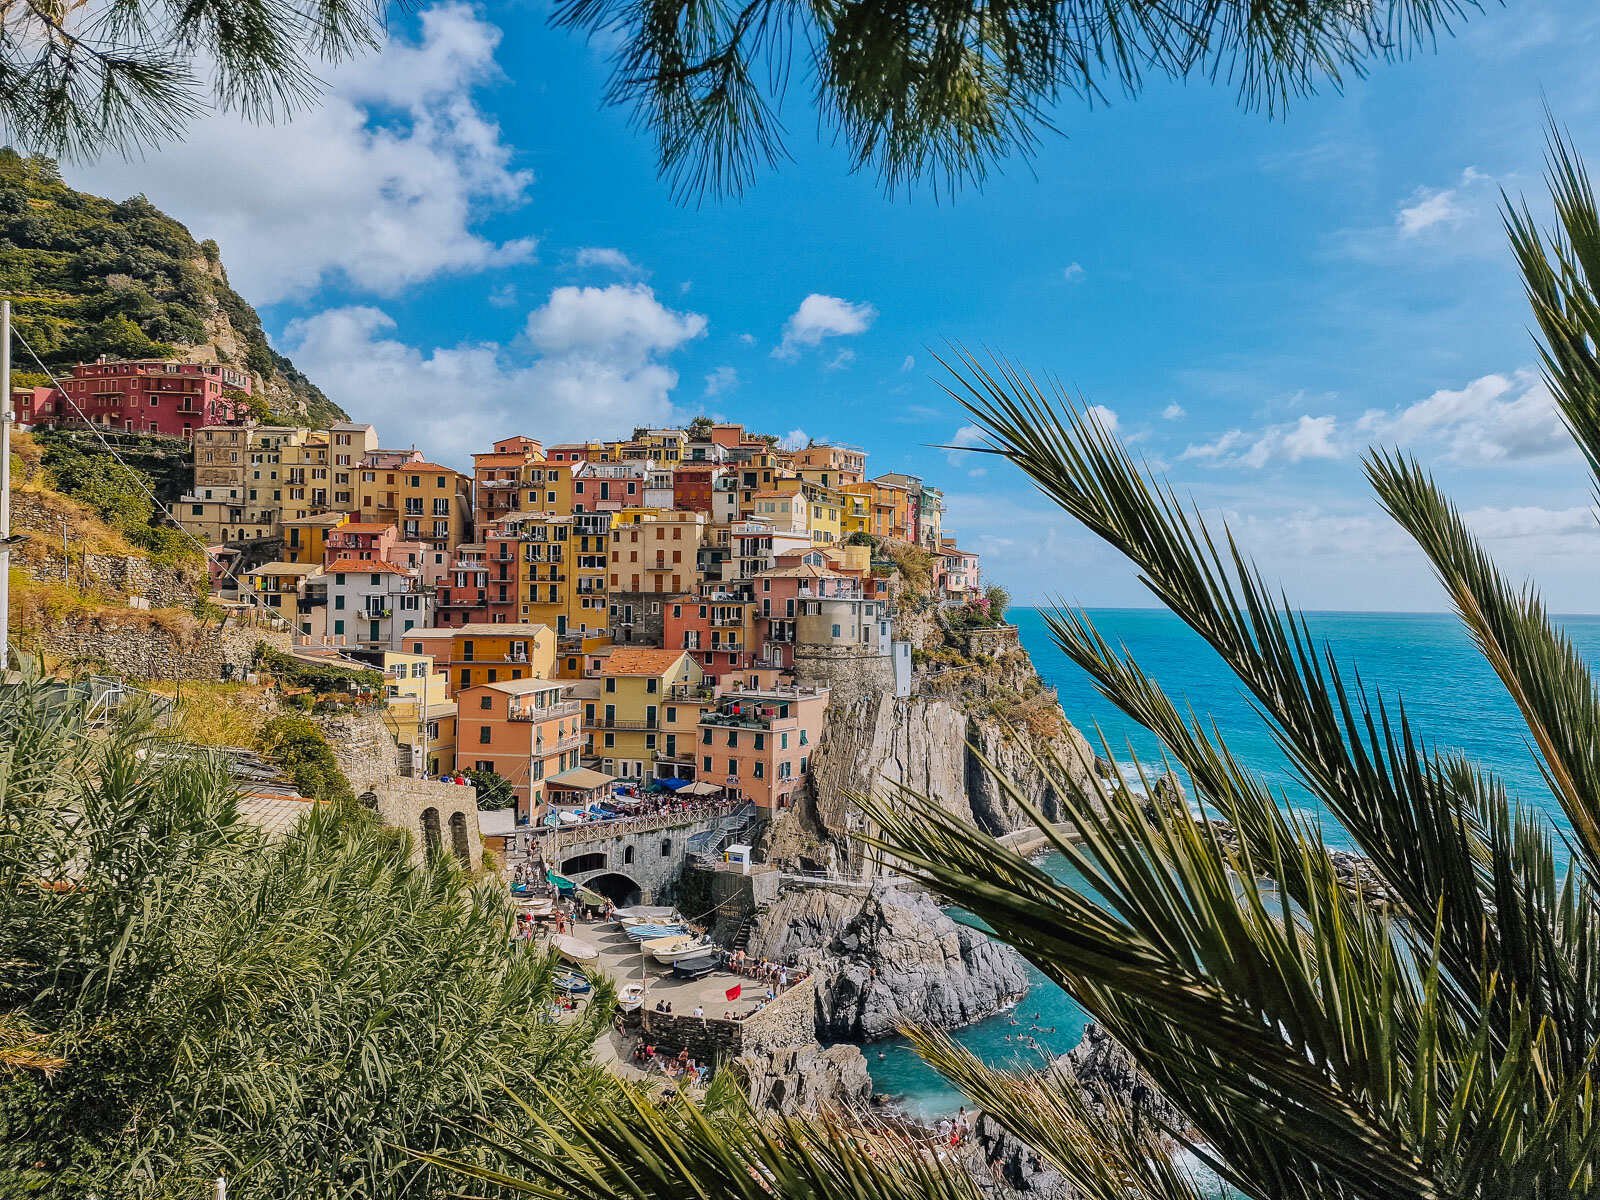 colourful village of Manarola seen on a one day trip to cinque terre